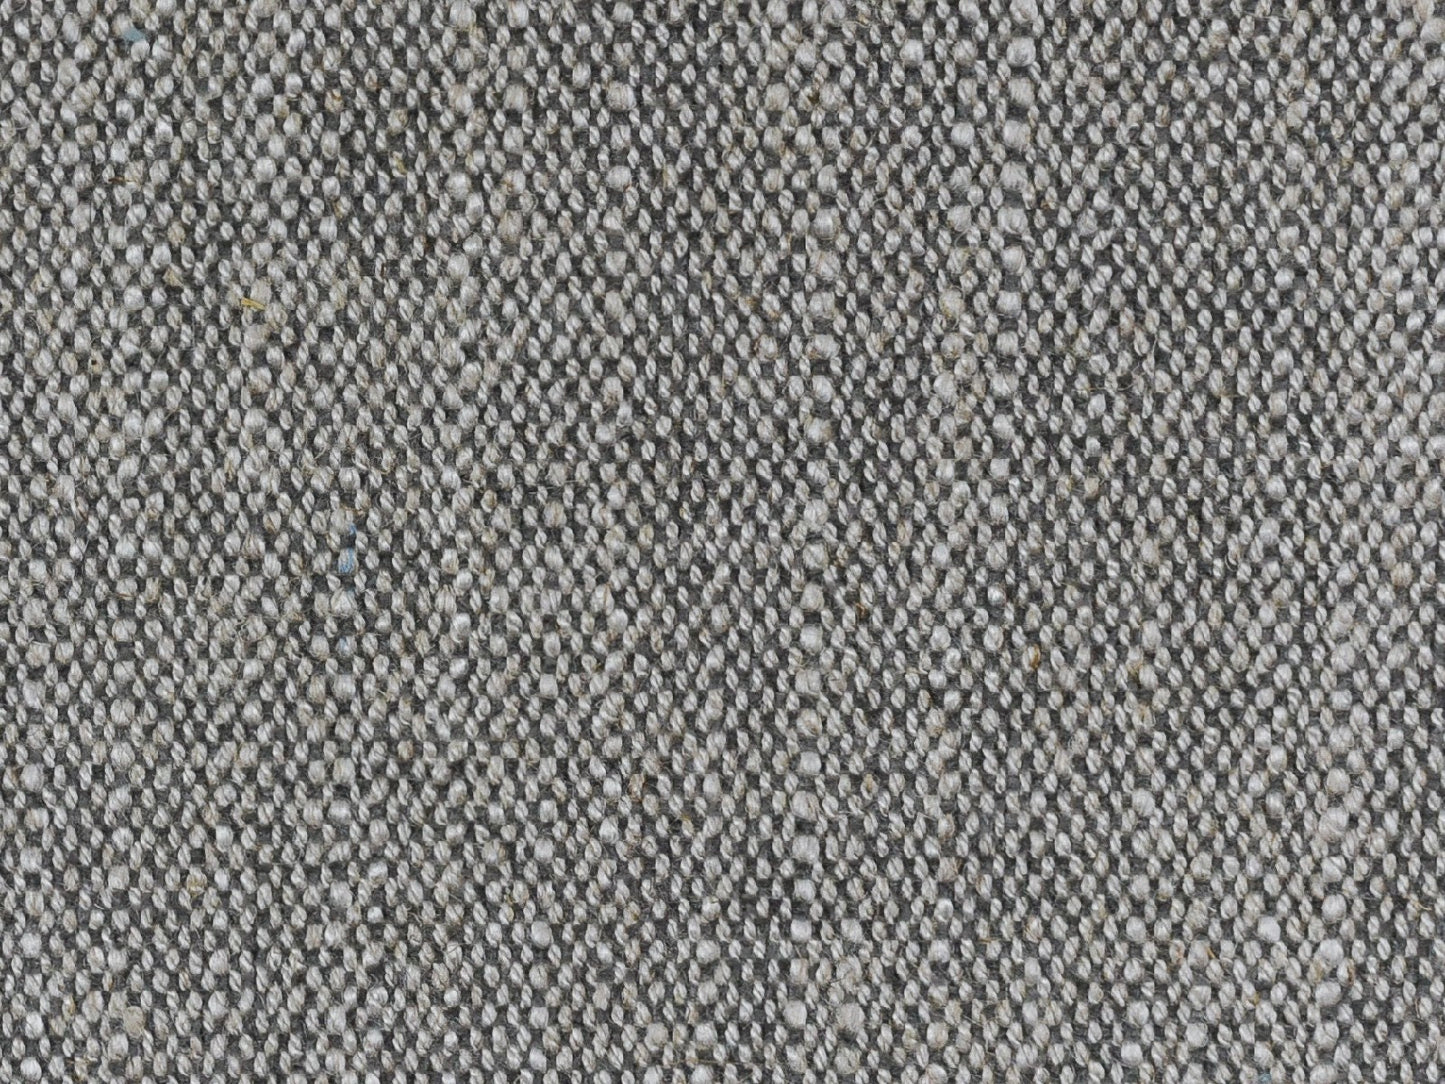 Heavy Duty Elegant Textured Linen Upholstery Fabric By The Yard High Abrasion Fabric For Chair Couch Aluminum